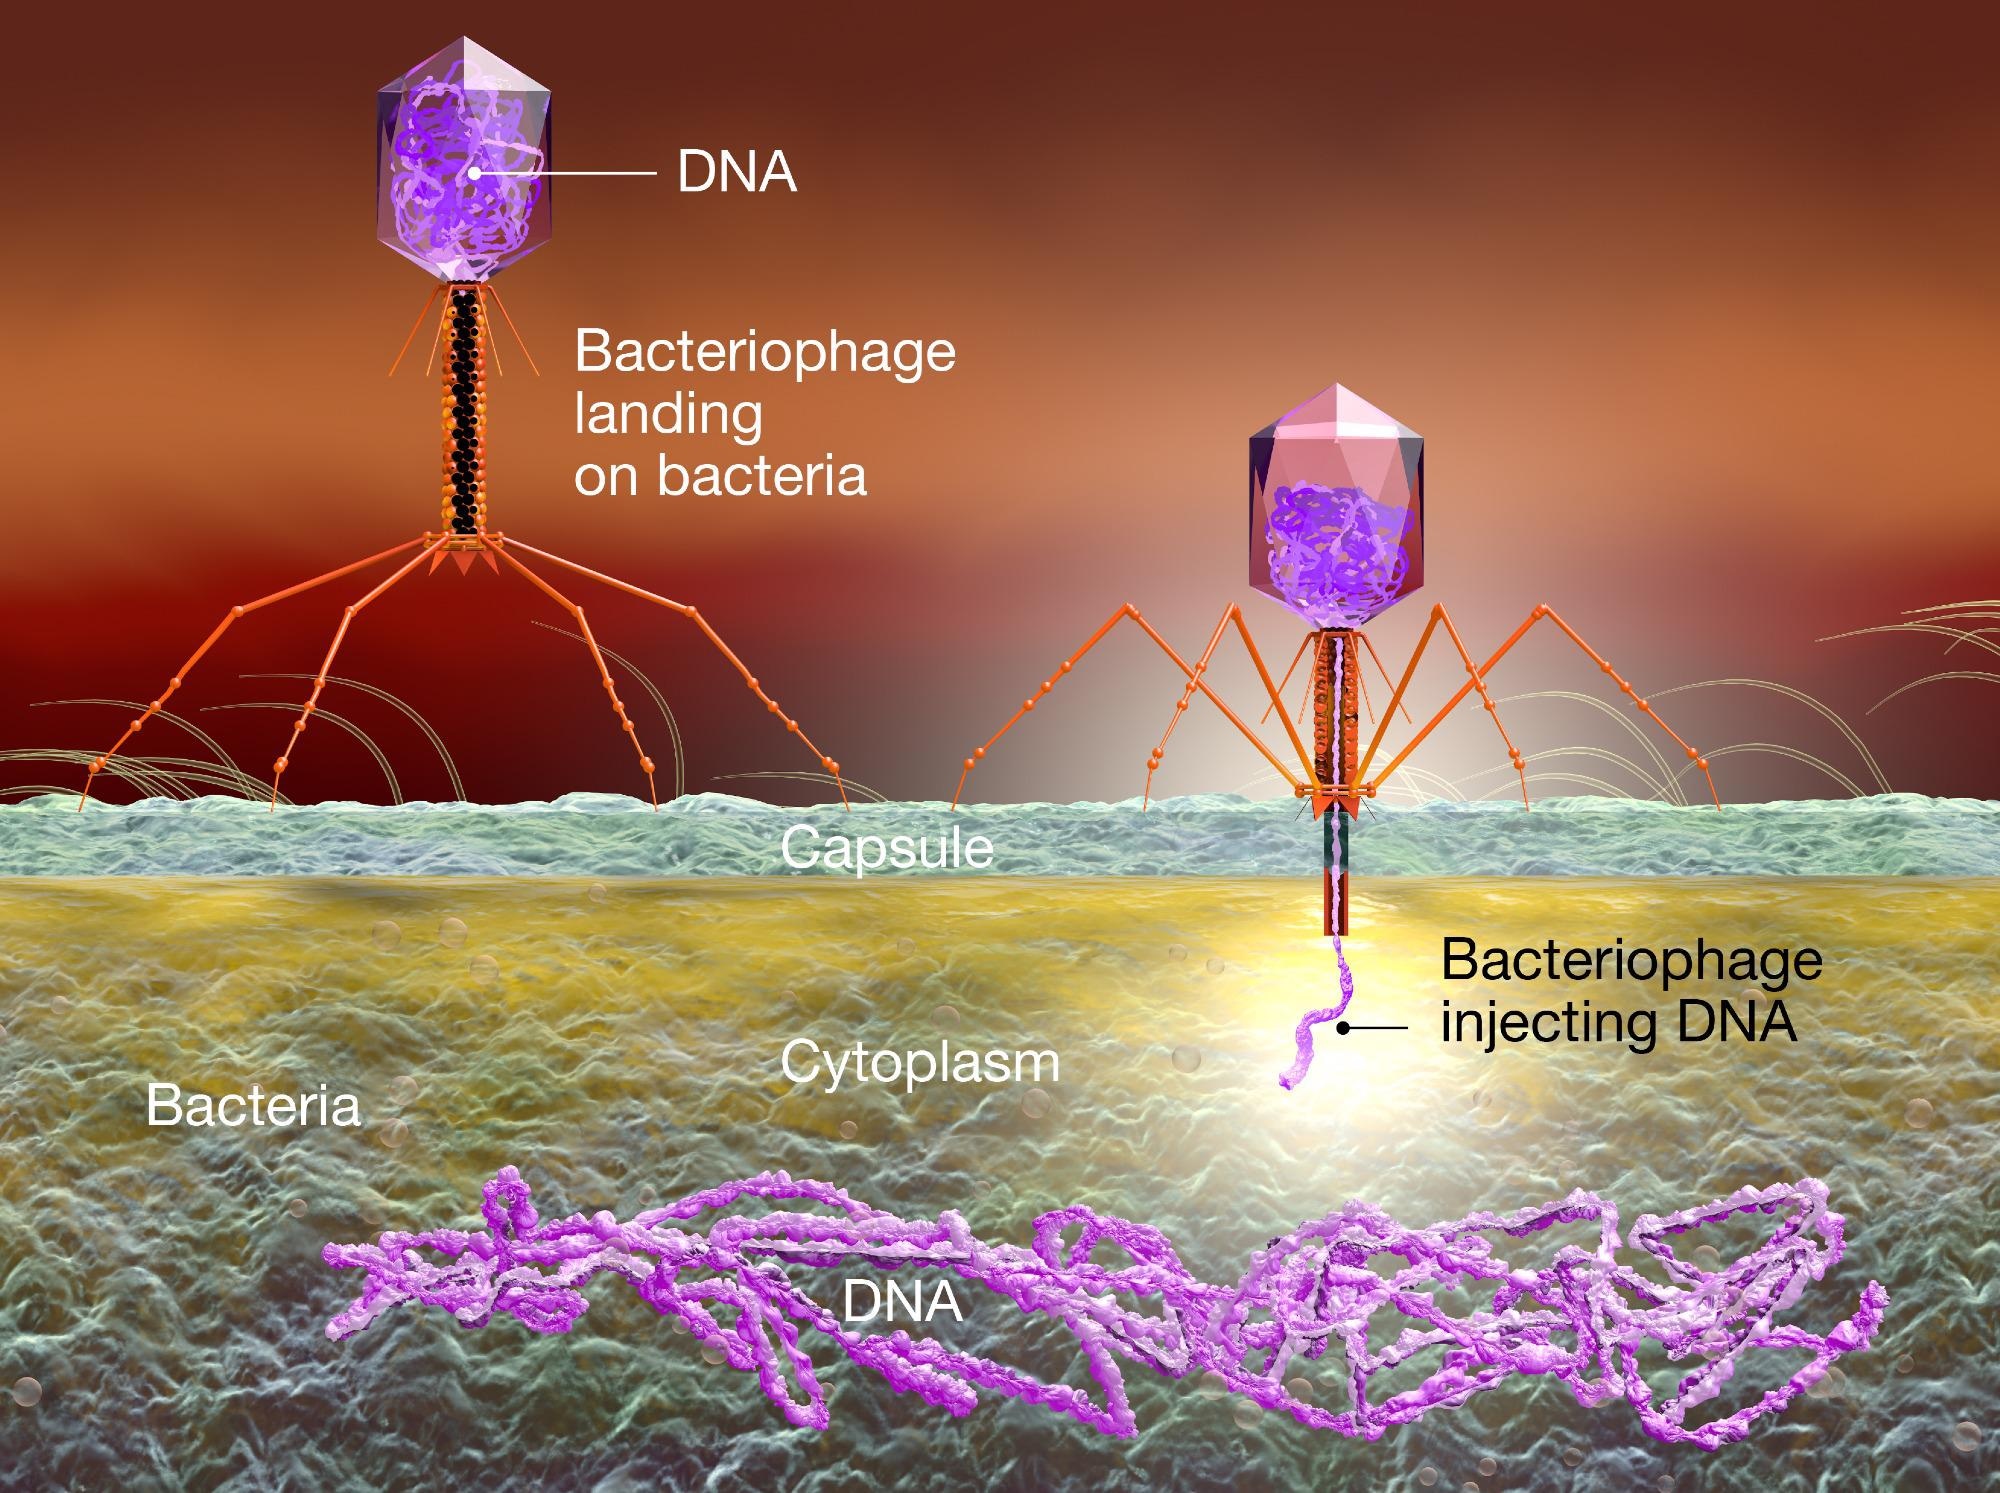 3D Illustration showing bacteriophage attacking E. coli bacteria and injecting DNA. Image Credit: Axel_Kock / Shutterstock